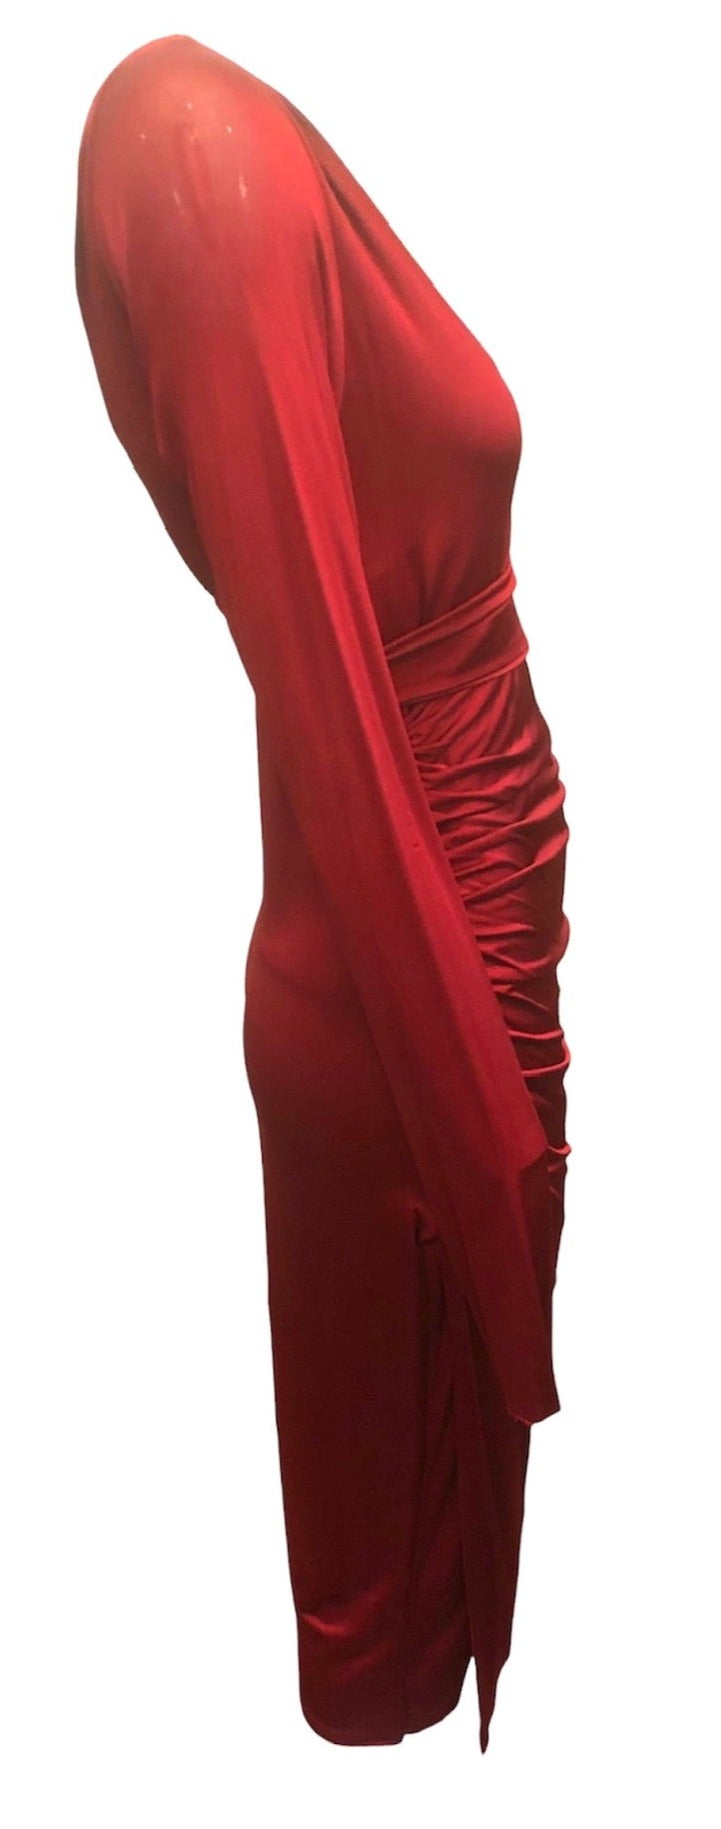 Tom Ford for Gucci 2003 Red Jersey Convertible Body Con Dress SIDE 2 of 5